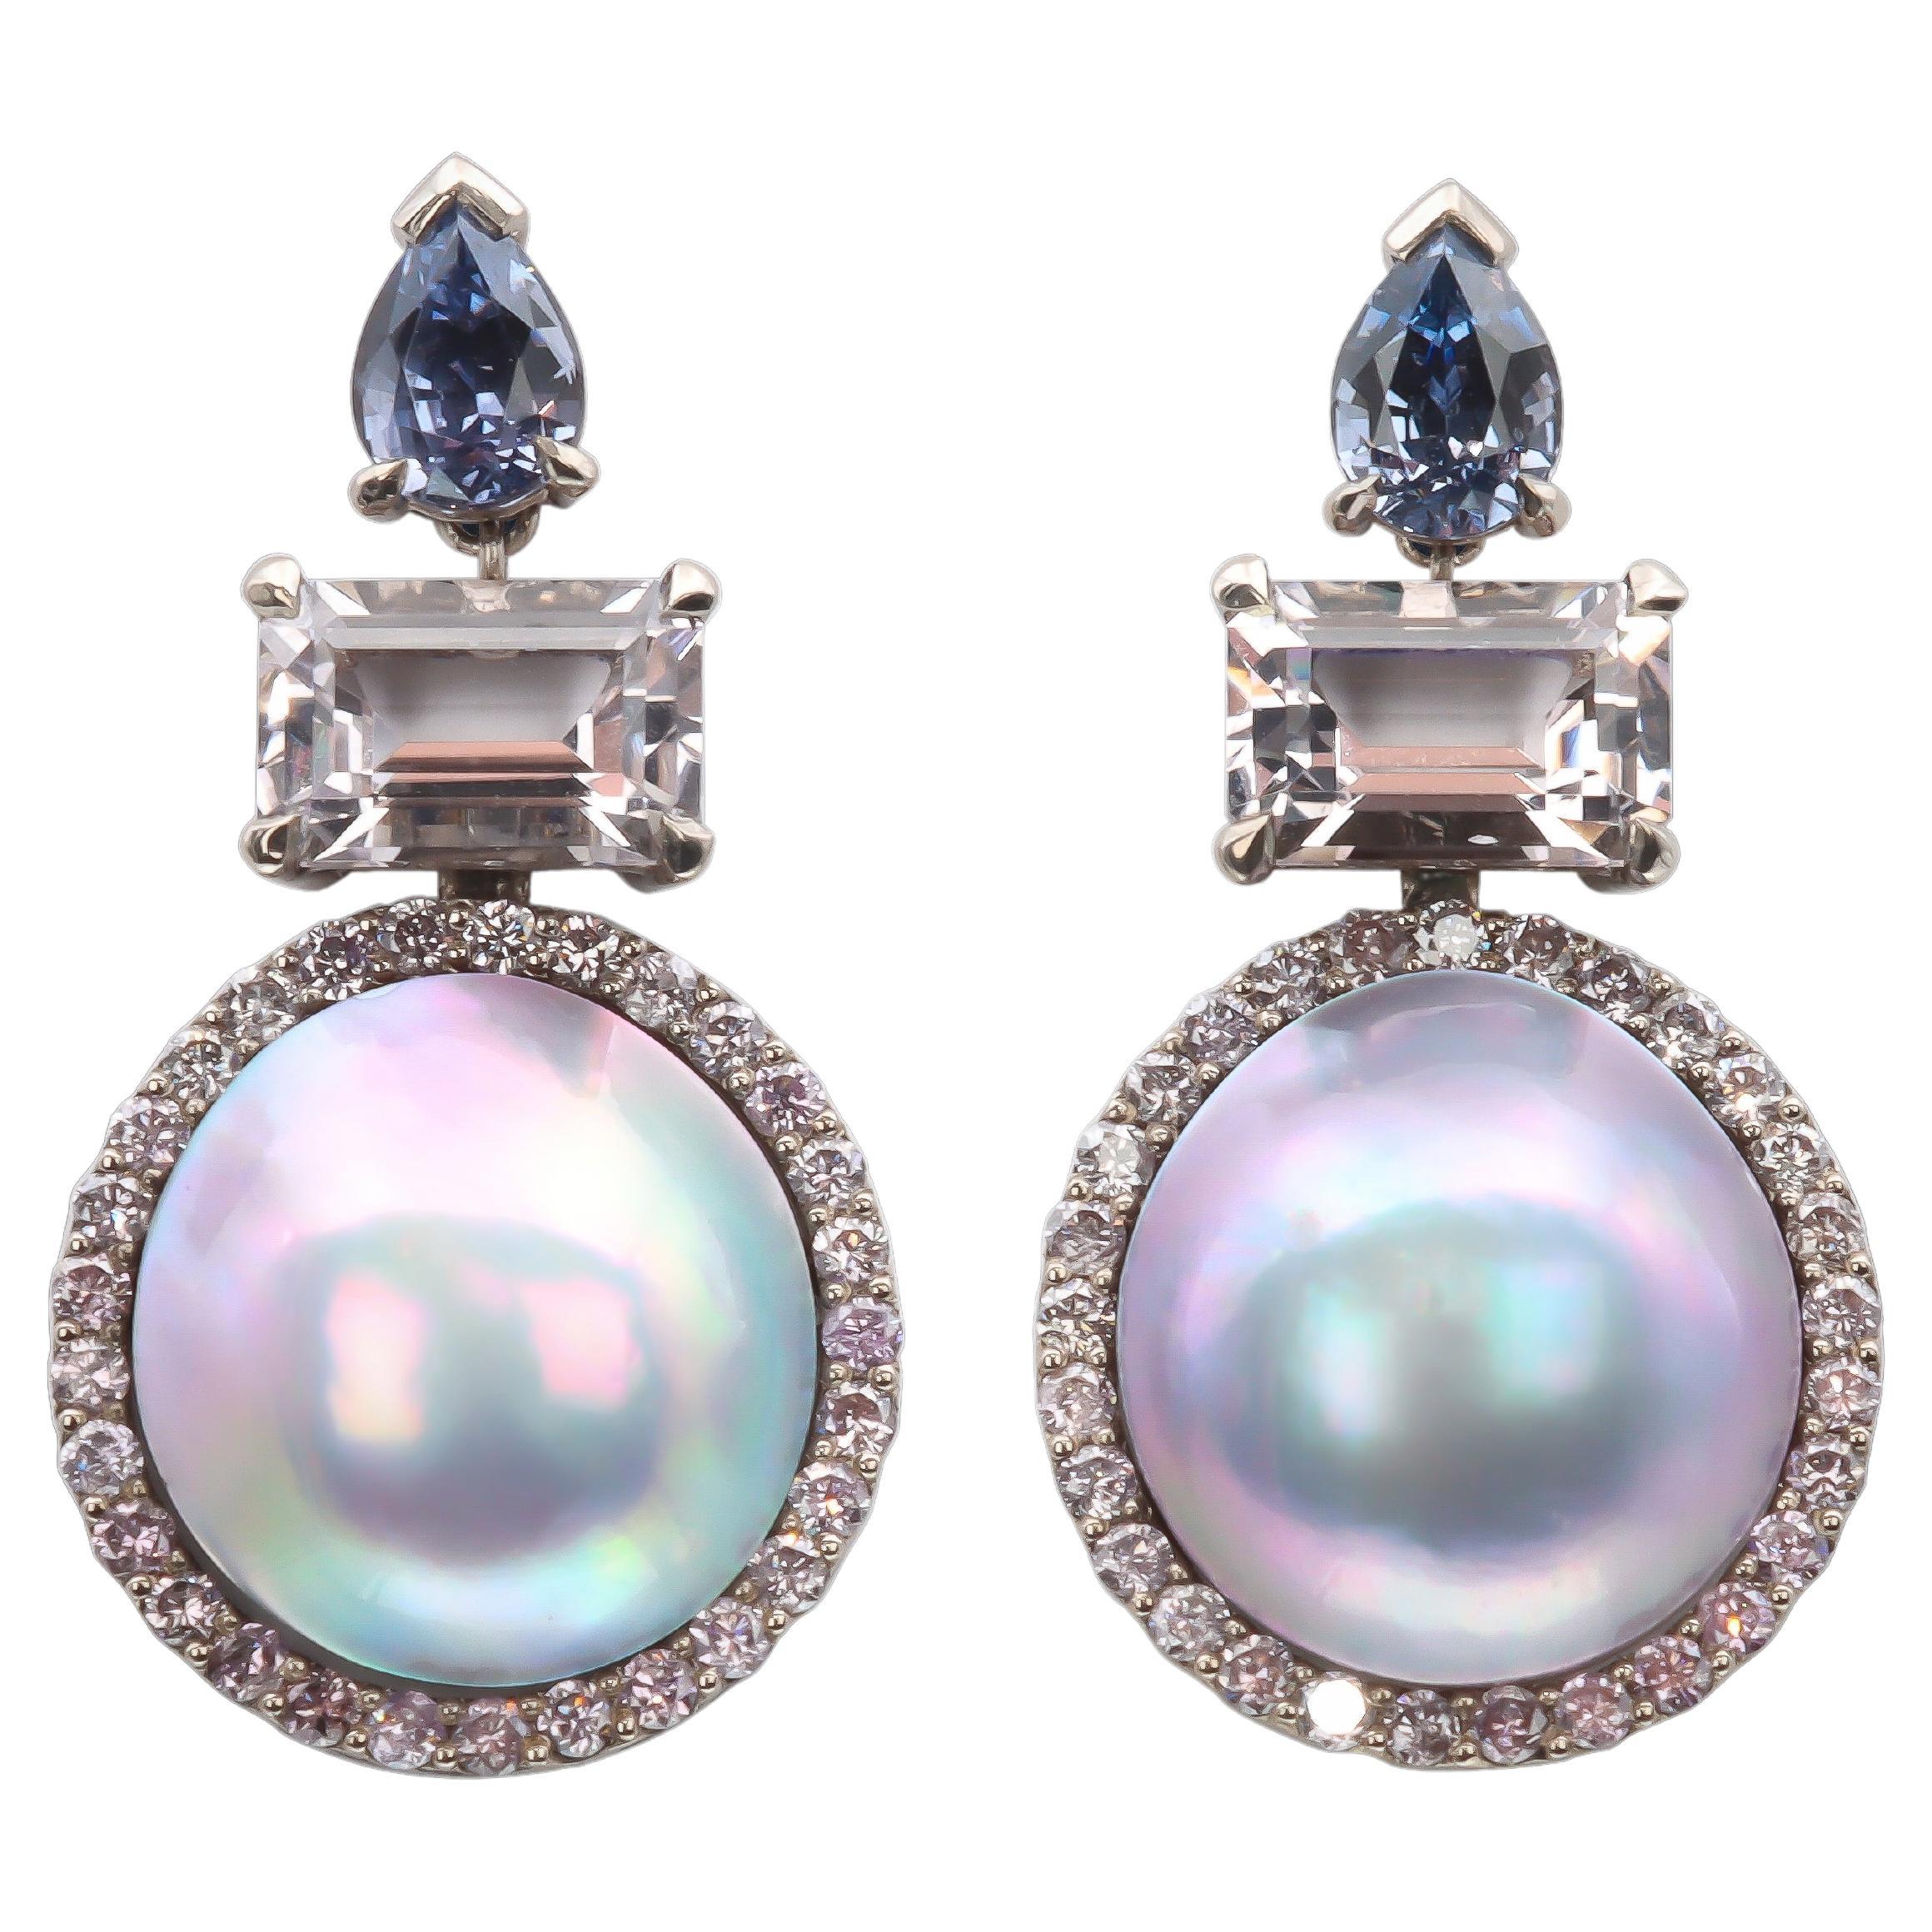 Aventina-Spencer, Cortez Mabé, Fancy Diamond, Spinel and Morganite Earrings For Sale